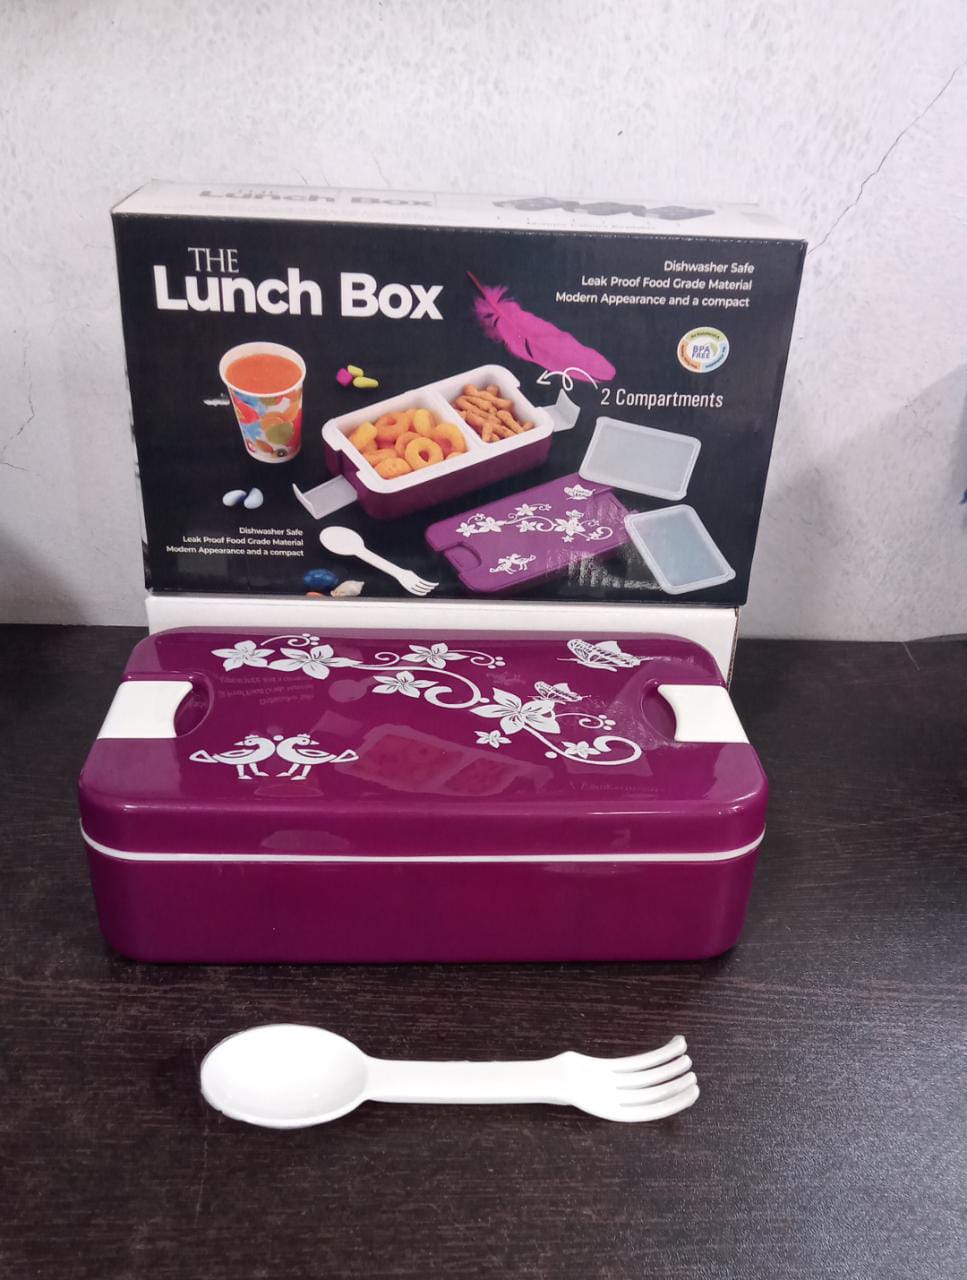 5332 AIRTIGHT LUNCH BOX 2 COMPARTMENT LUNCH BOX LEAK PROOF FOOD GRADE MATERIAL LUNCH BOX MODERN APPEARANCE & COMPACT LUNCH BOX WITH SPOON